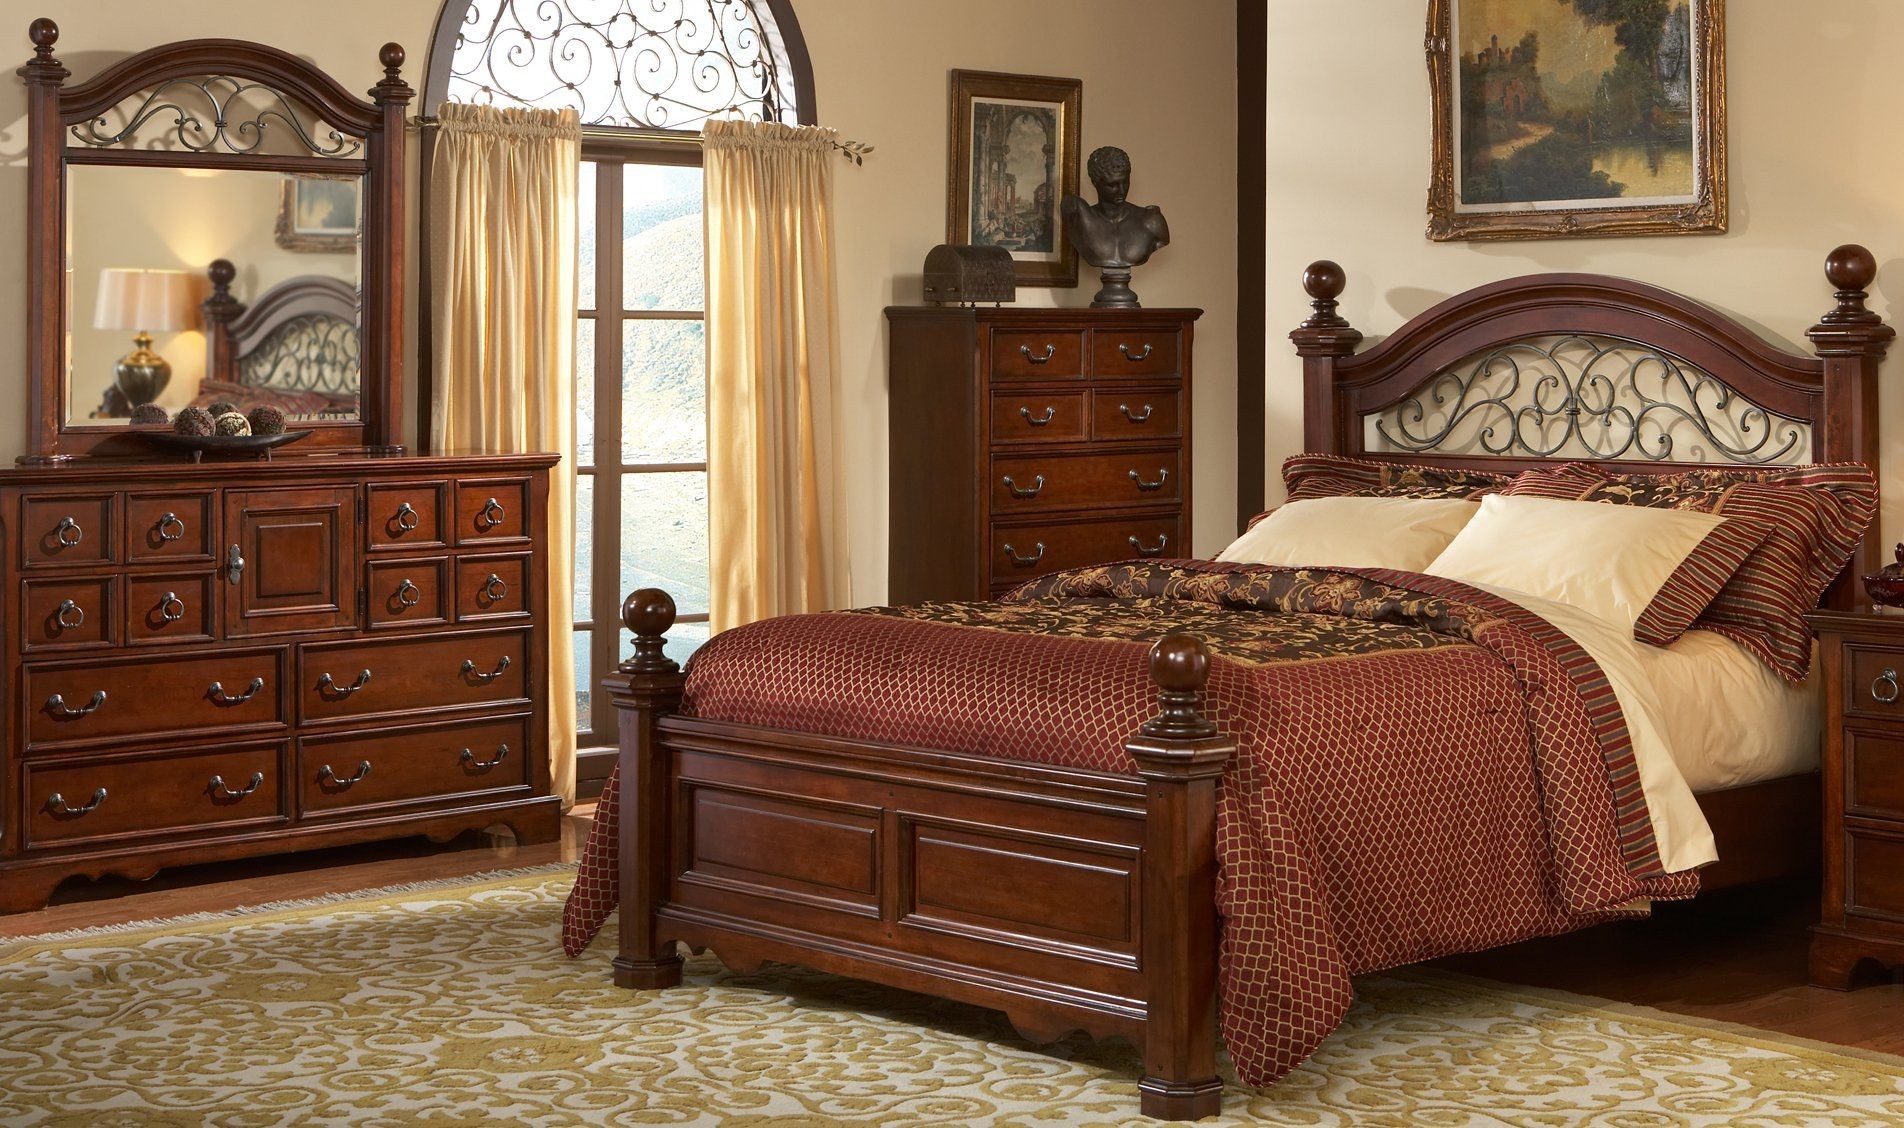 Wood and wrought iron headboards